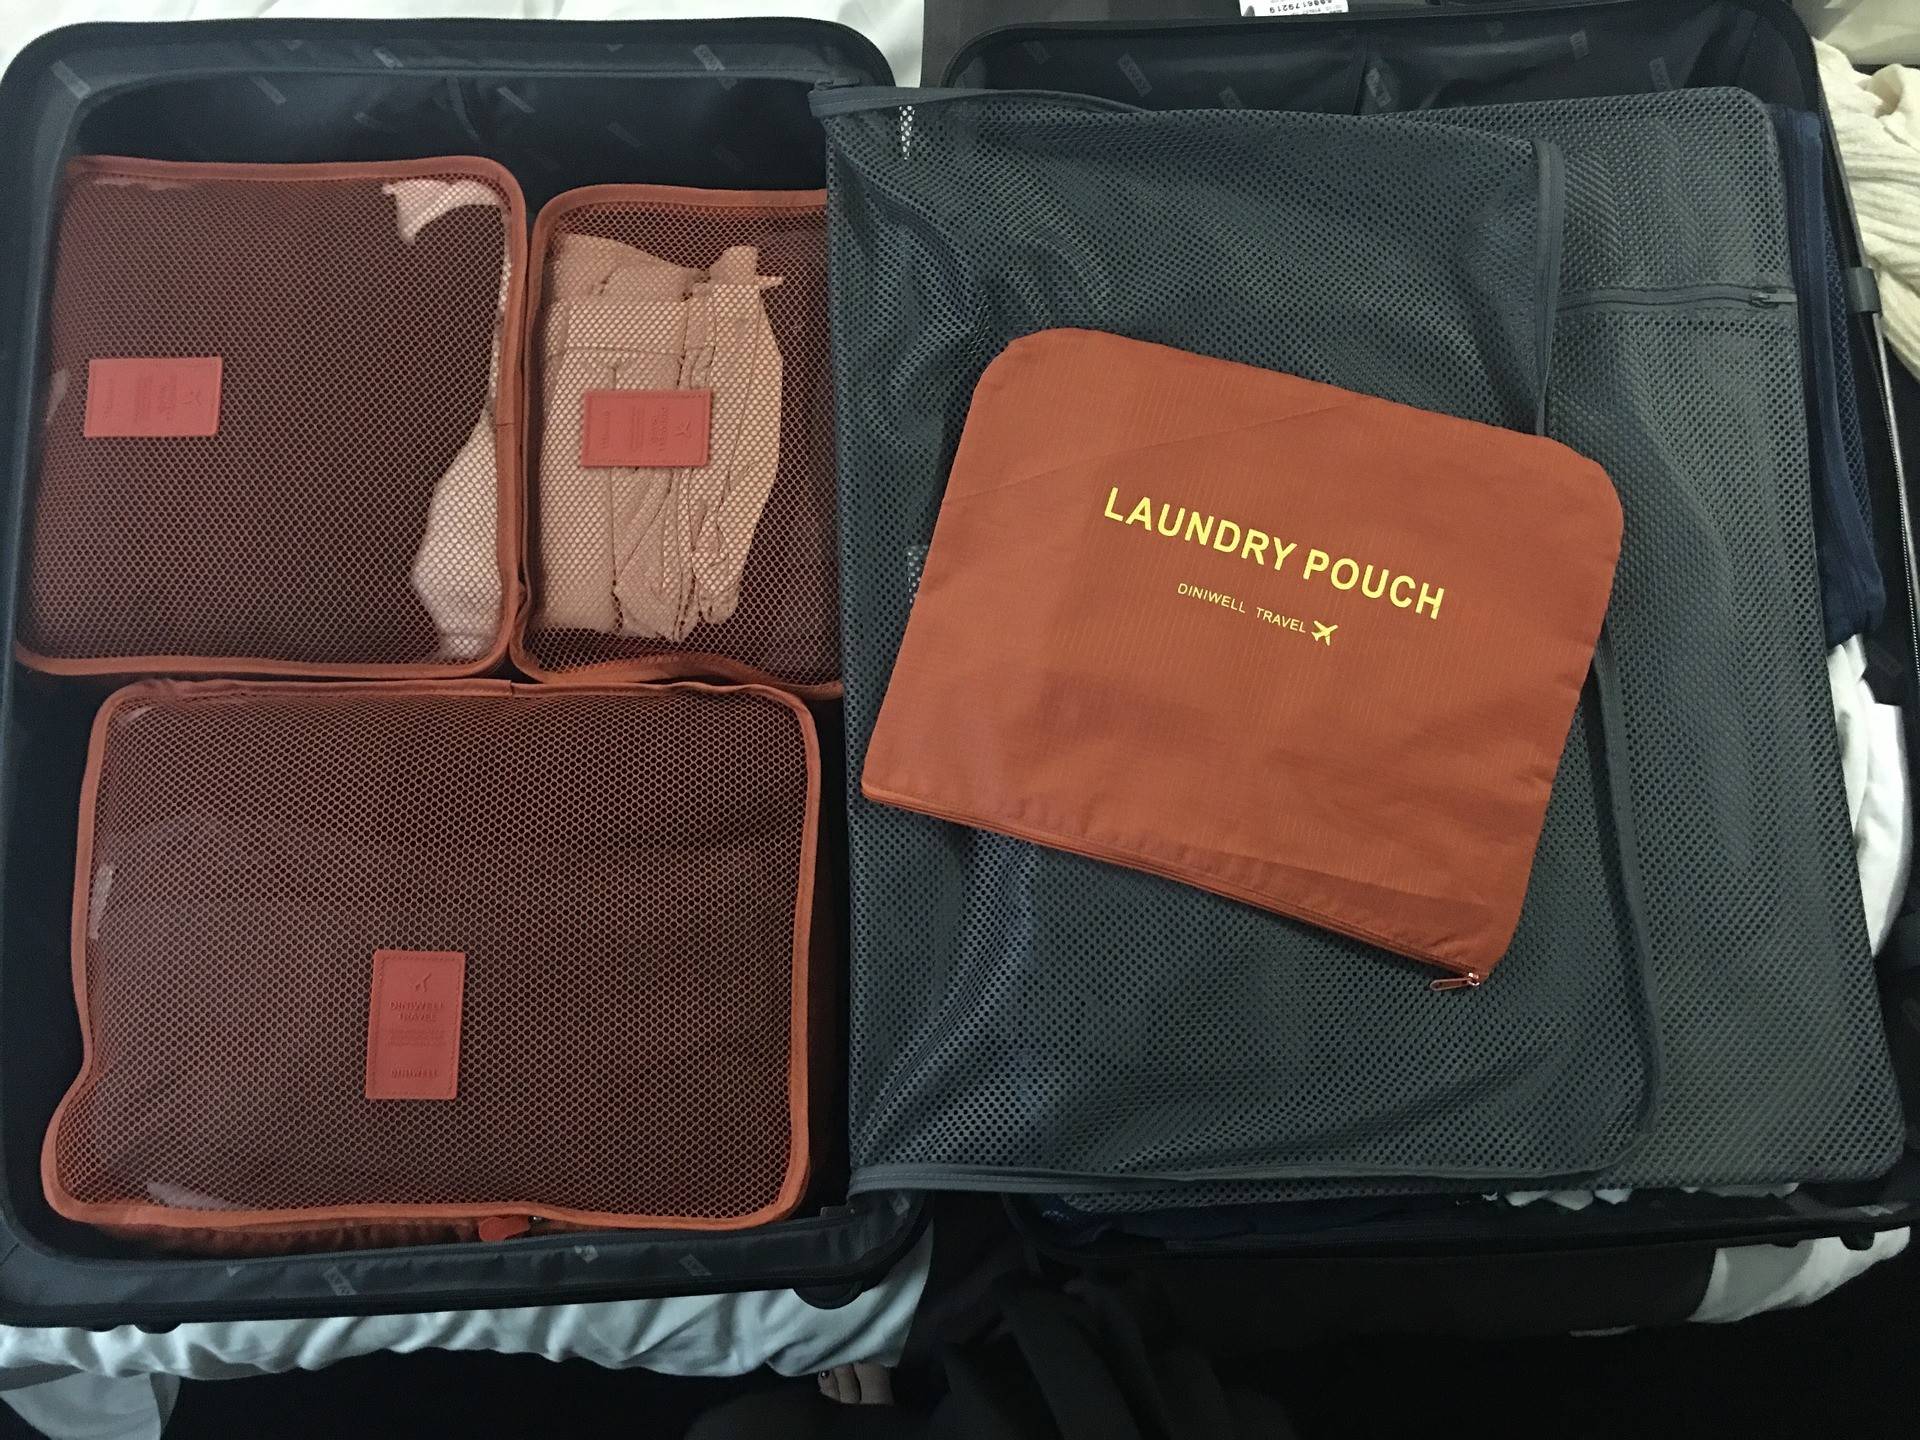 Here is Luggage packing cubes 